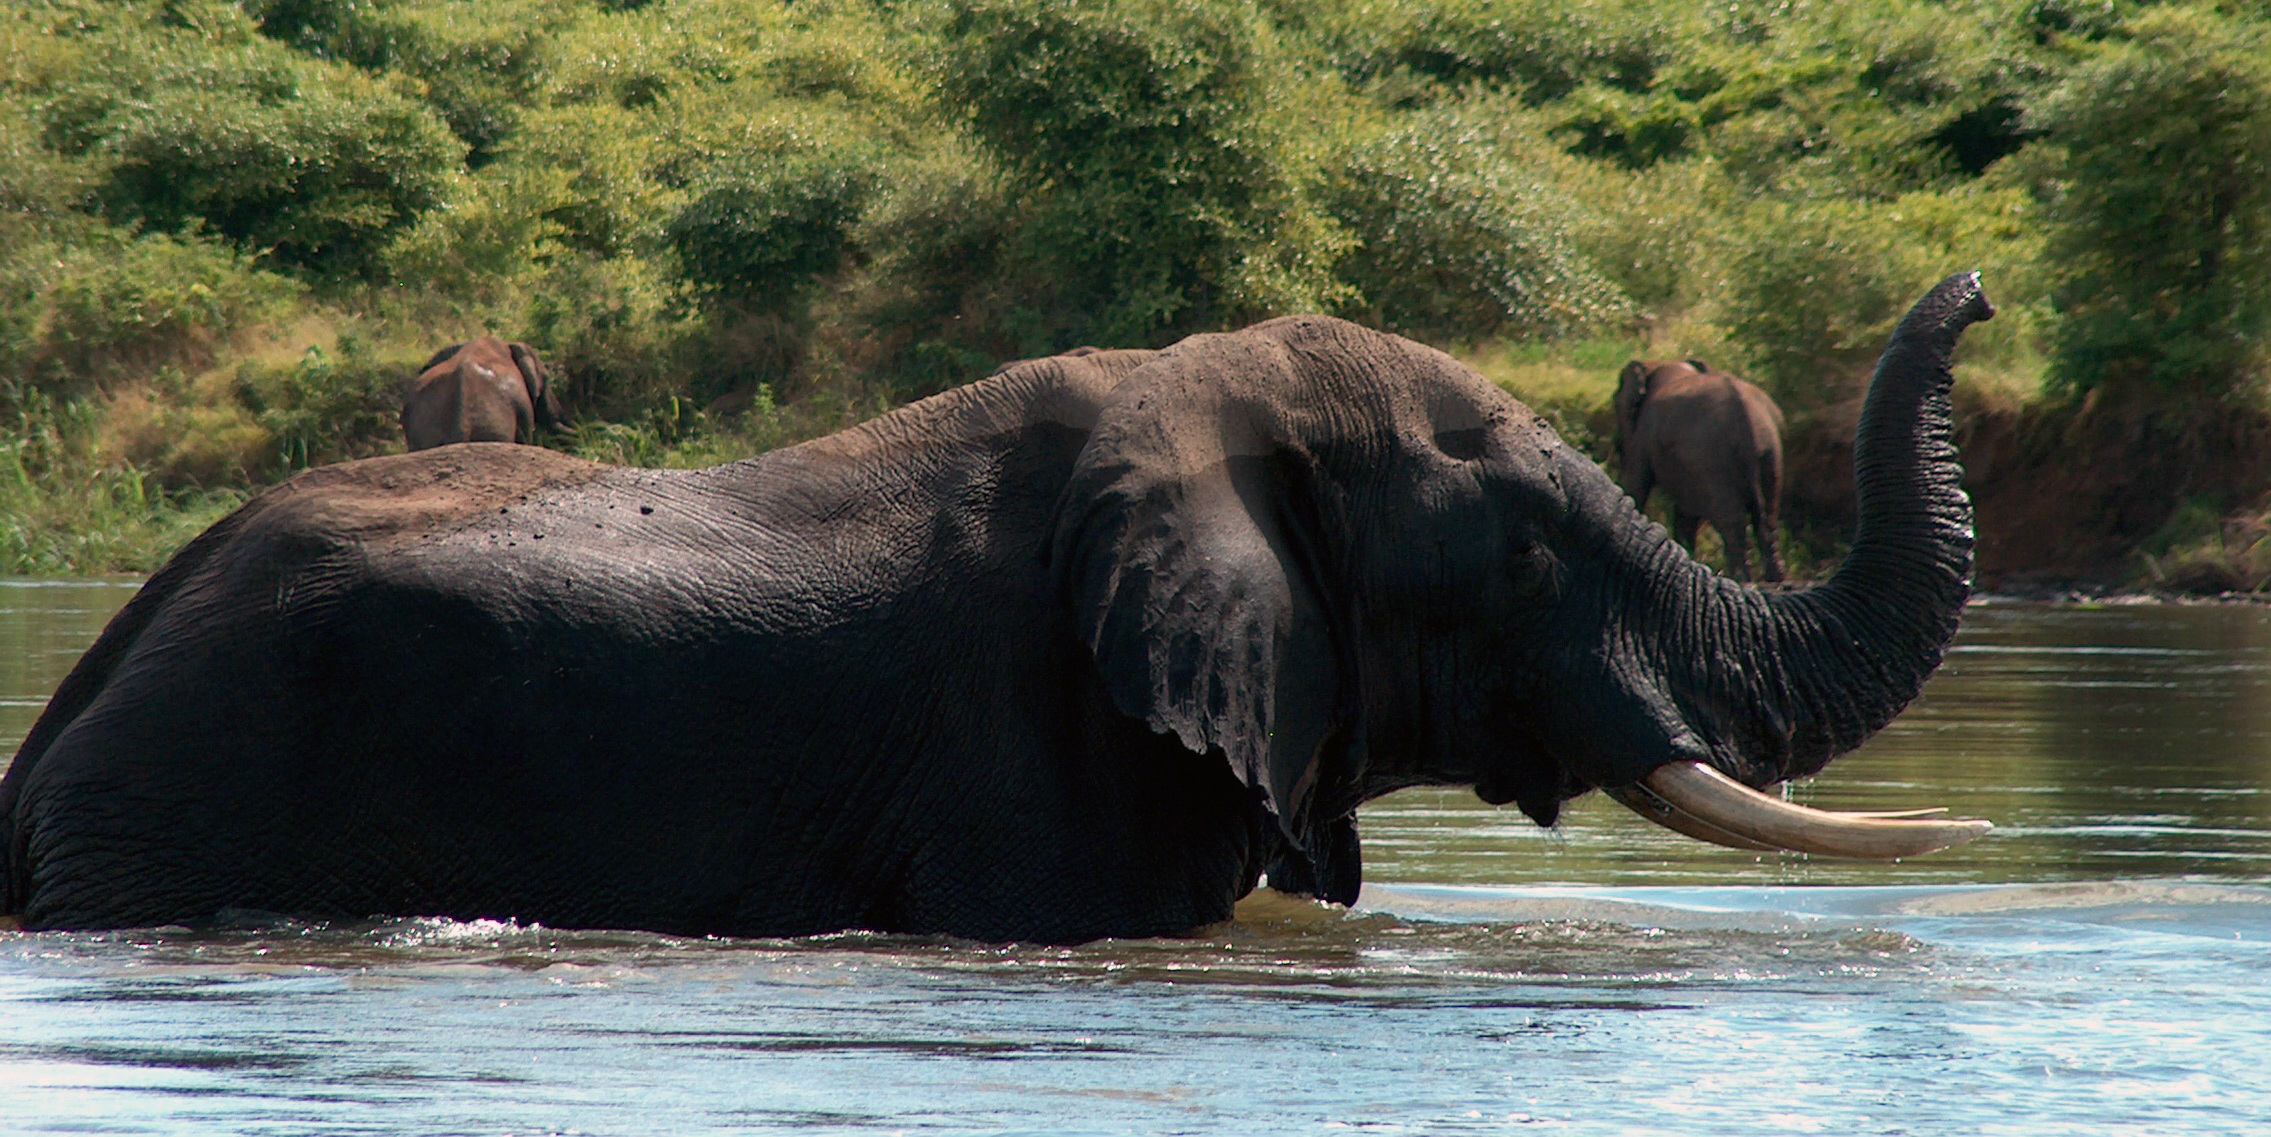 An elephant wades through water in Zambia. By taking part in wilife conservation in Africa, participants could help to conserve species like this.